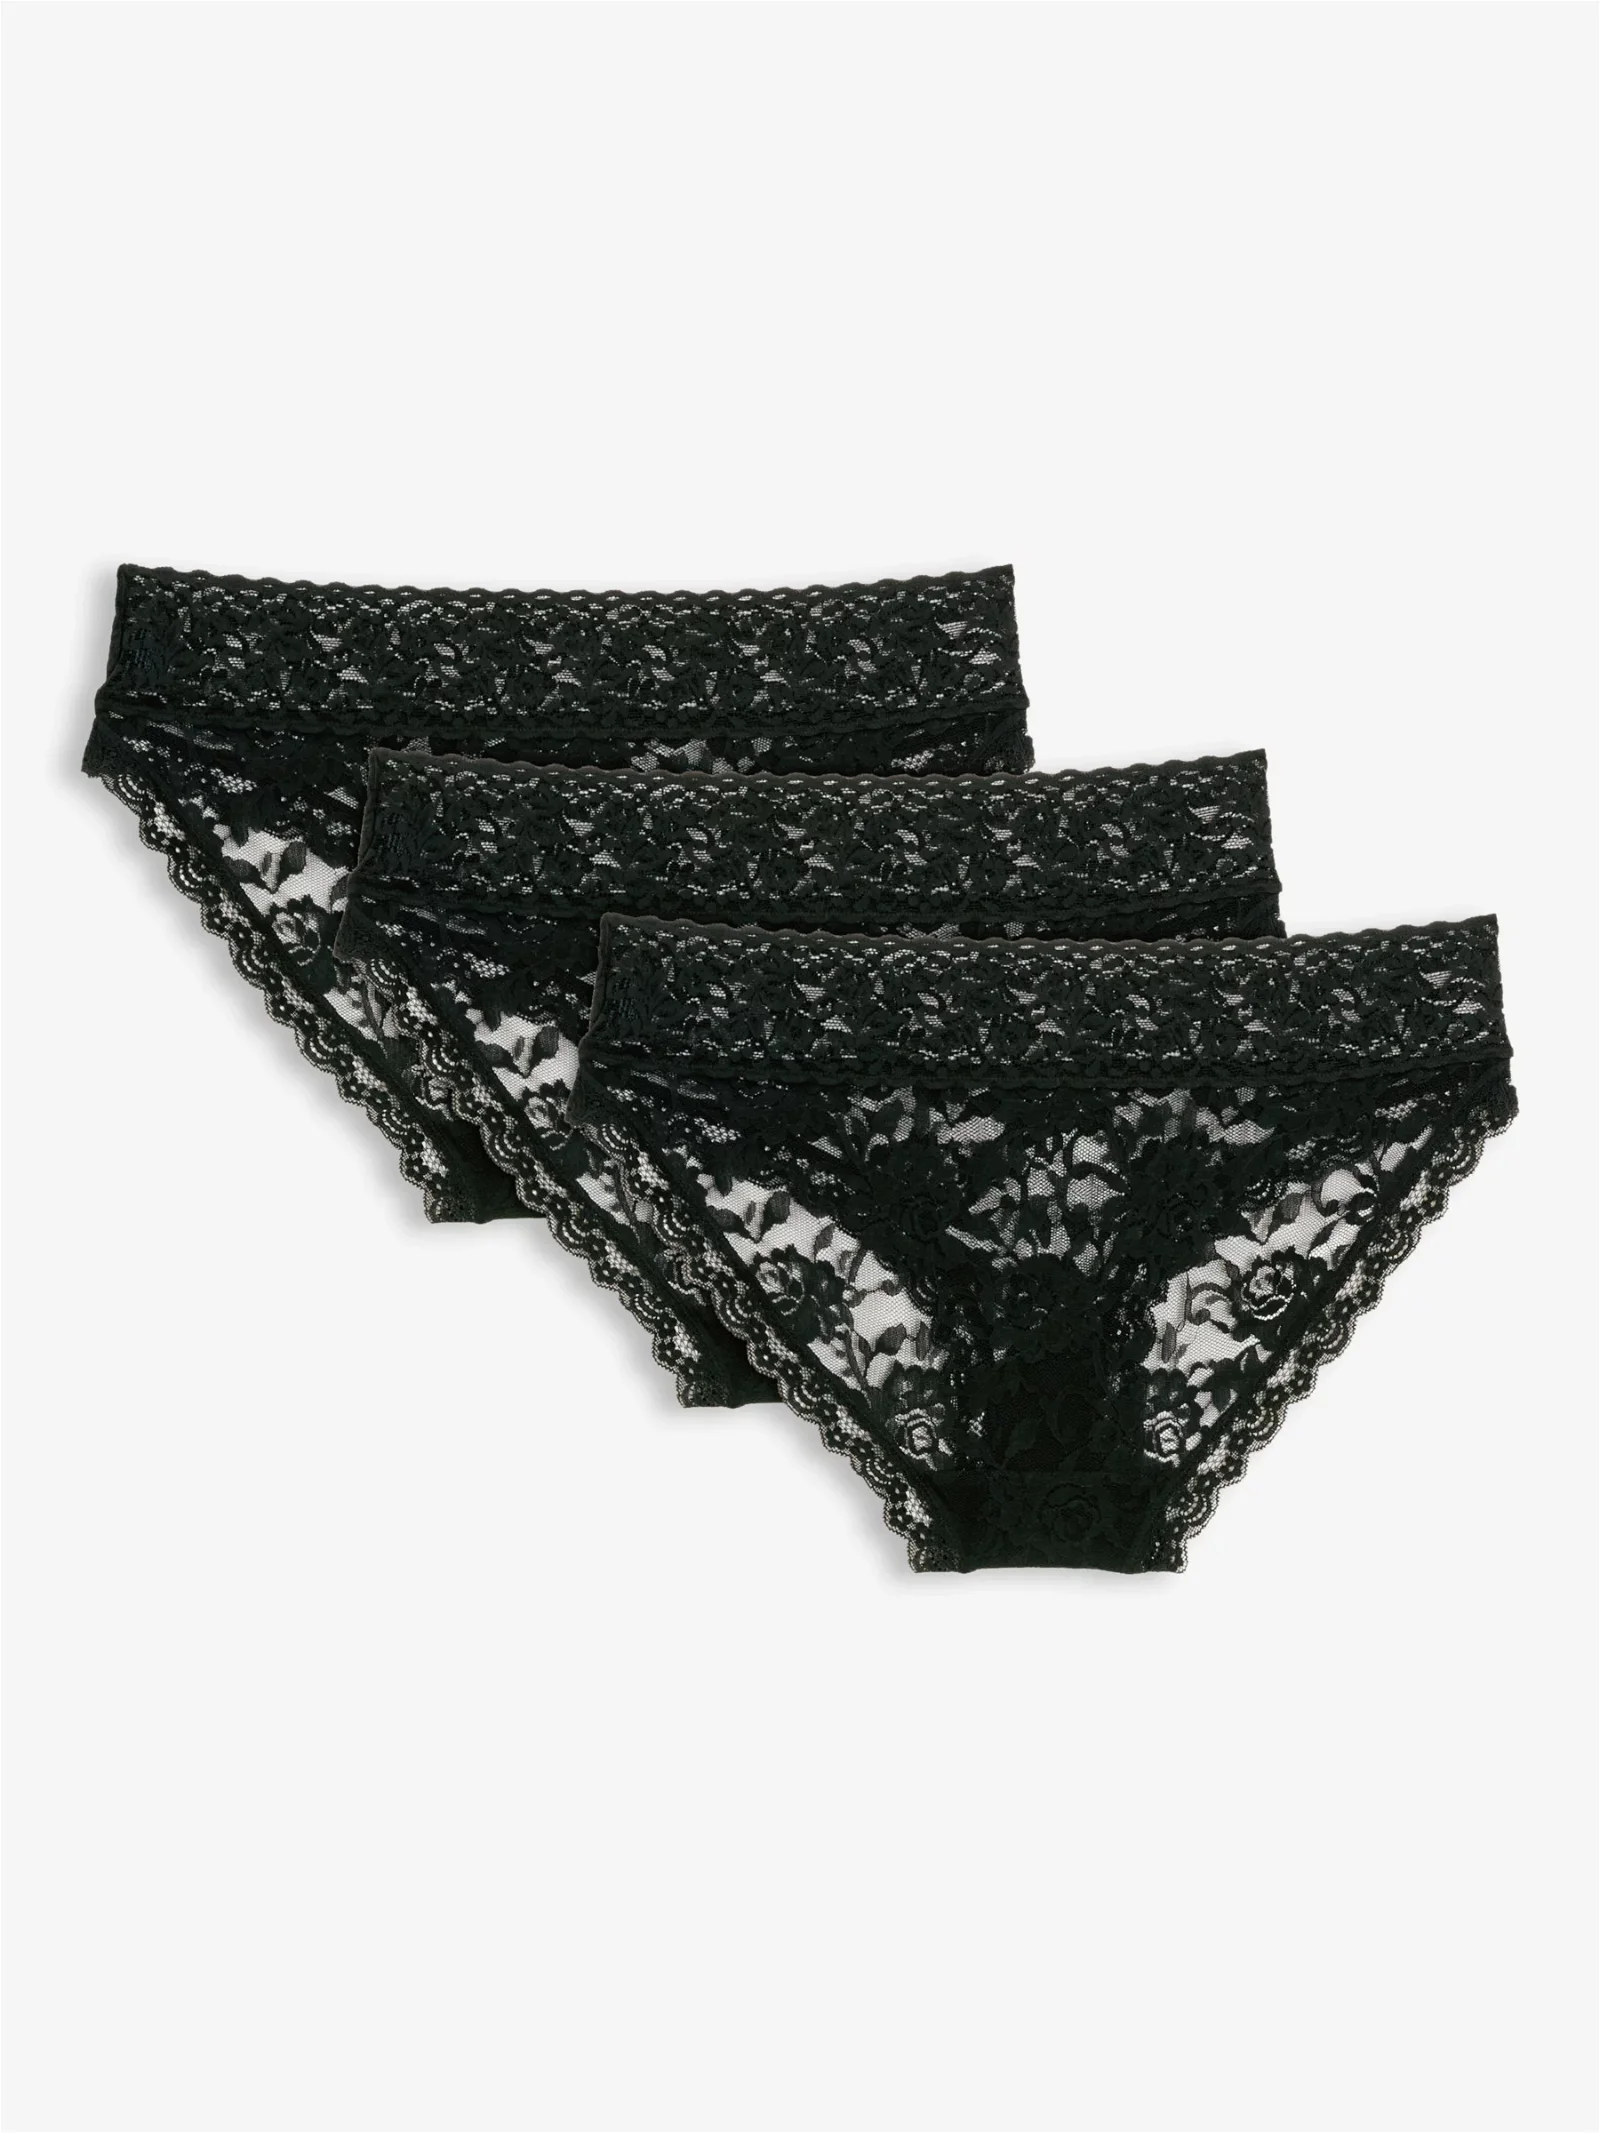 John Lewis ANYDAY Helenca Lace Bikini Knickers, Pack of 3, Pink/Shell/Aubergine  at John Lewis & Partners